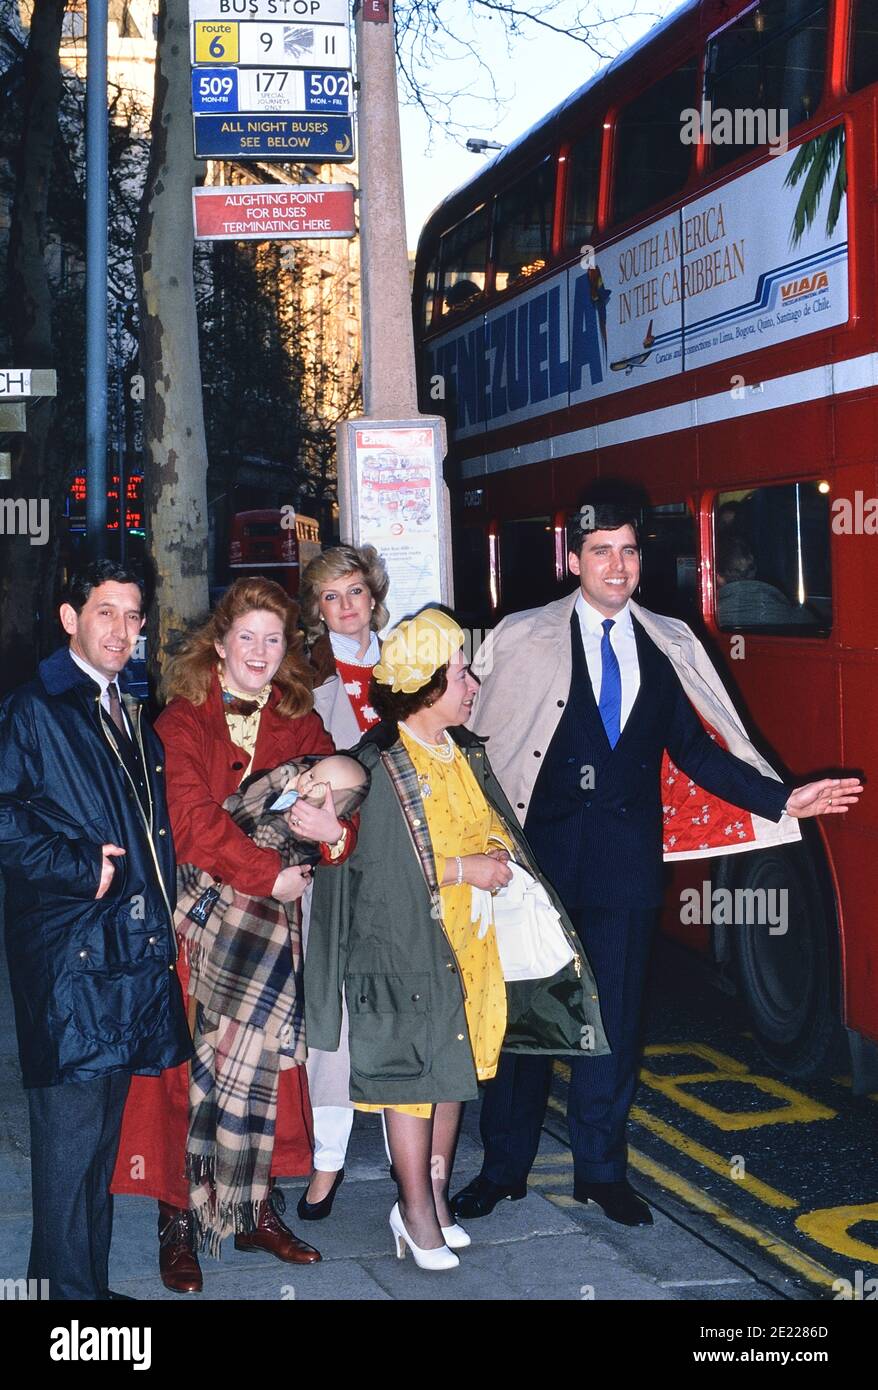 A group of the British Royal family impersonators queueing at a bus stop to catch a red double-decker bus. London. England, UK,  Circa 1989 Stock Photo